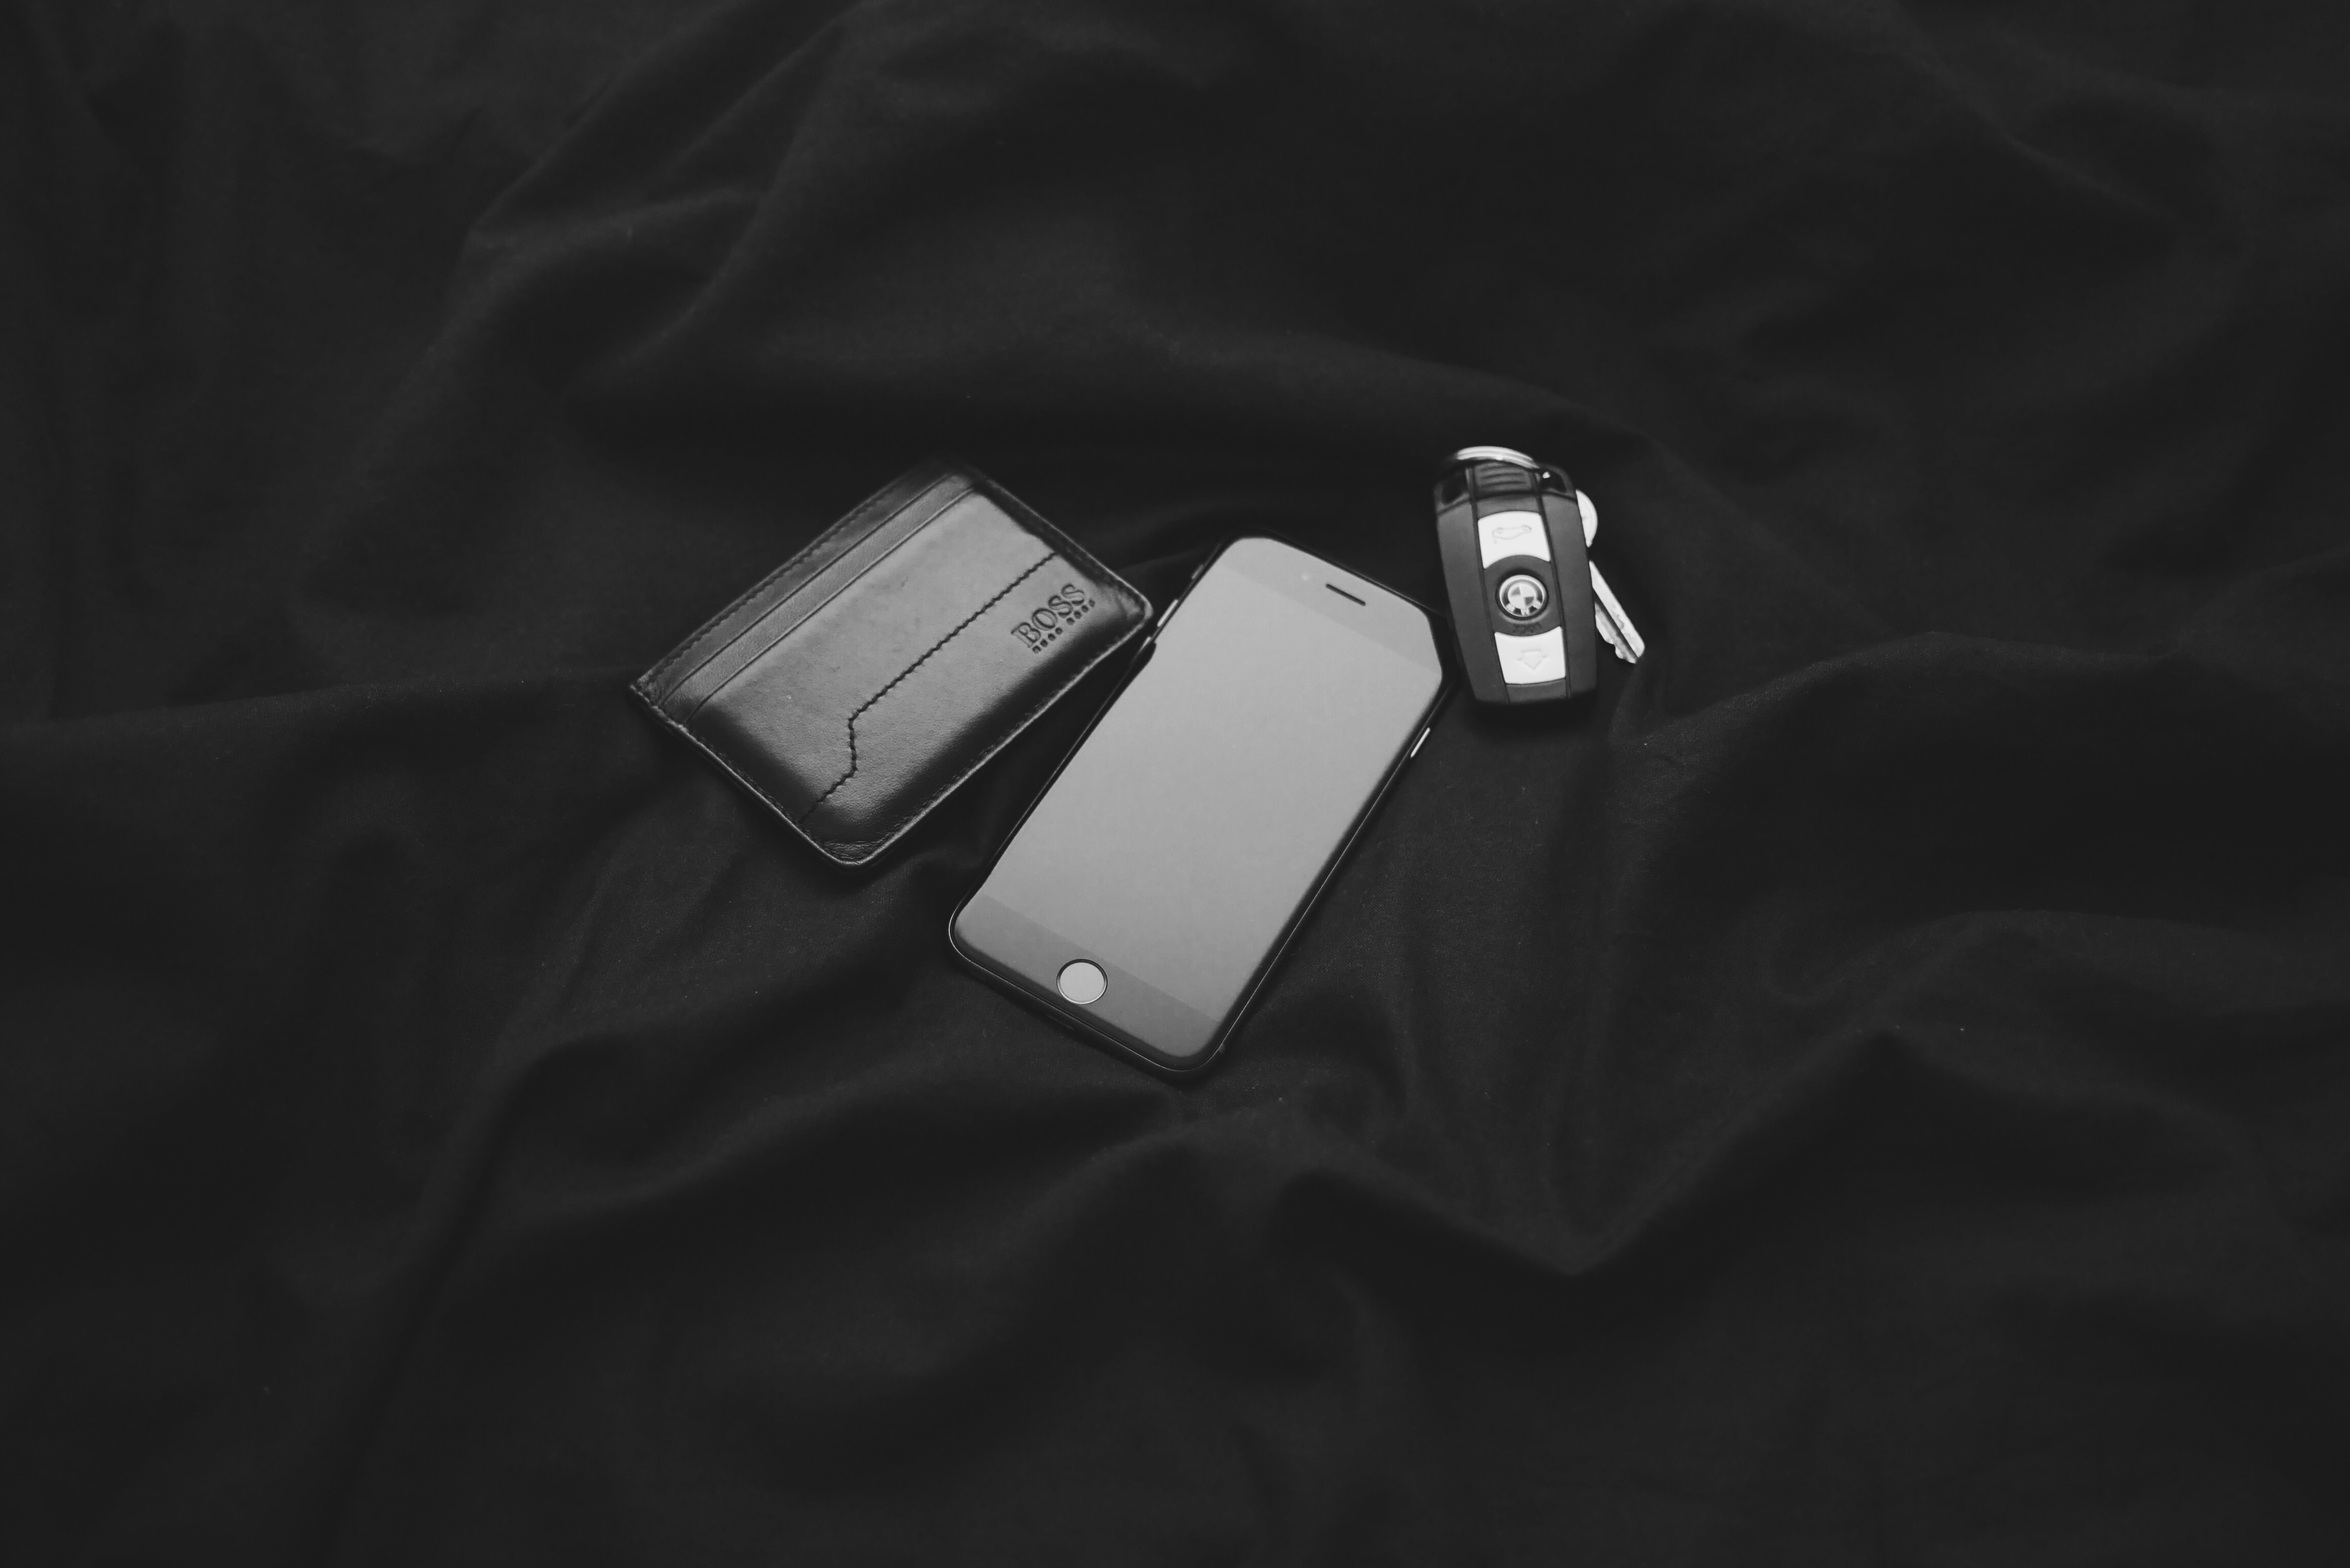 space gray iphone 6 and car fob